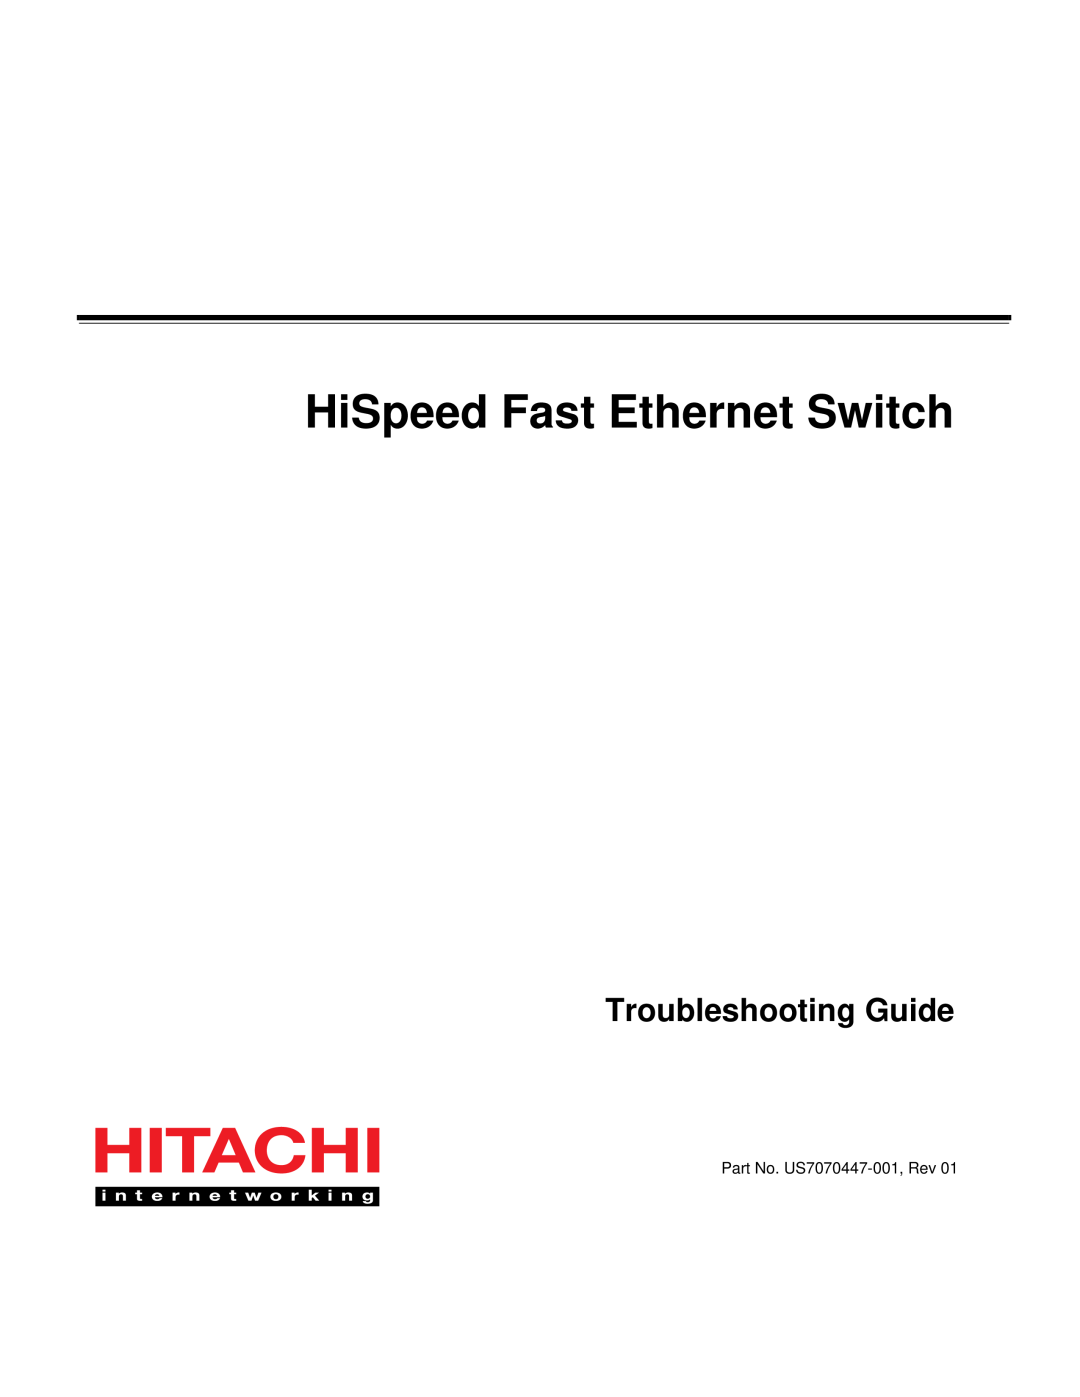 Hitachi US7070447-001 manual Troubleshooting Guide, HiSpeed Fast Ethernet Switch 